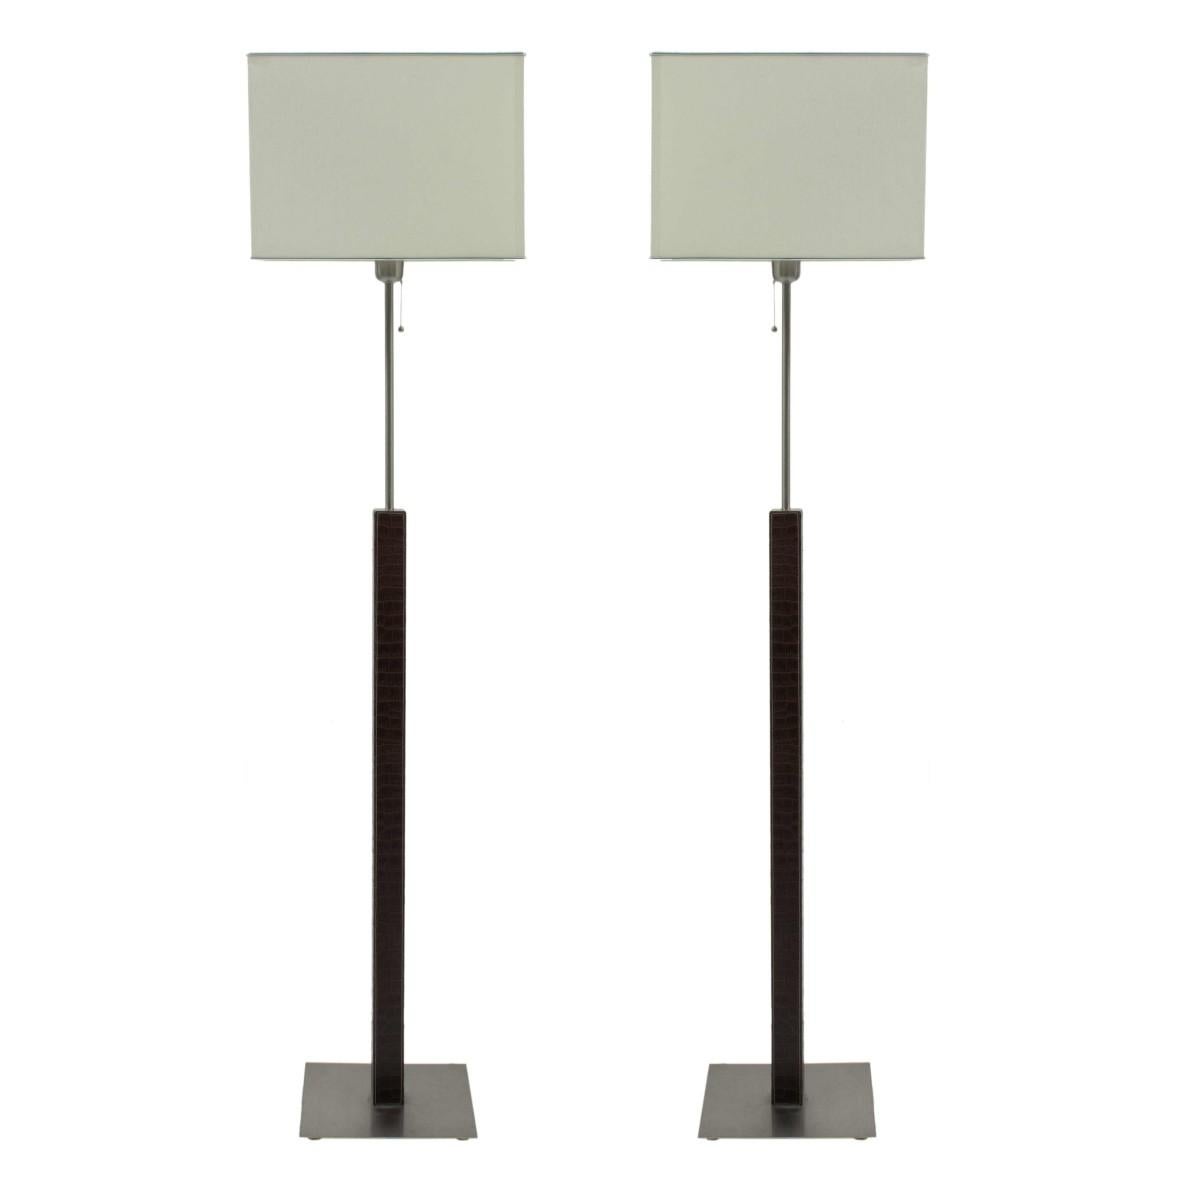 Pair of Midcentury French Steel Floor Lamps by Le Dauphin